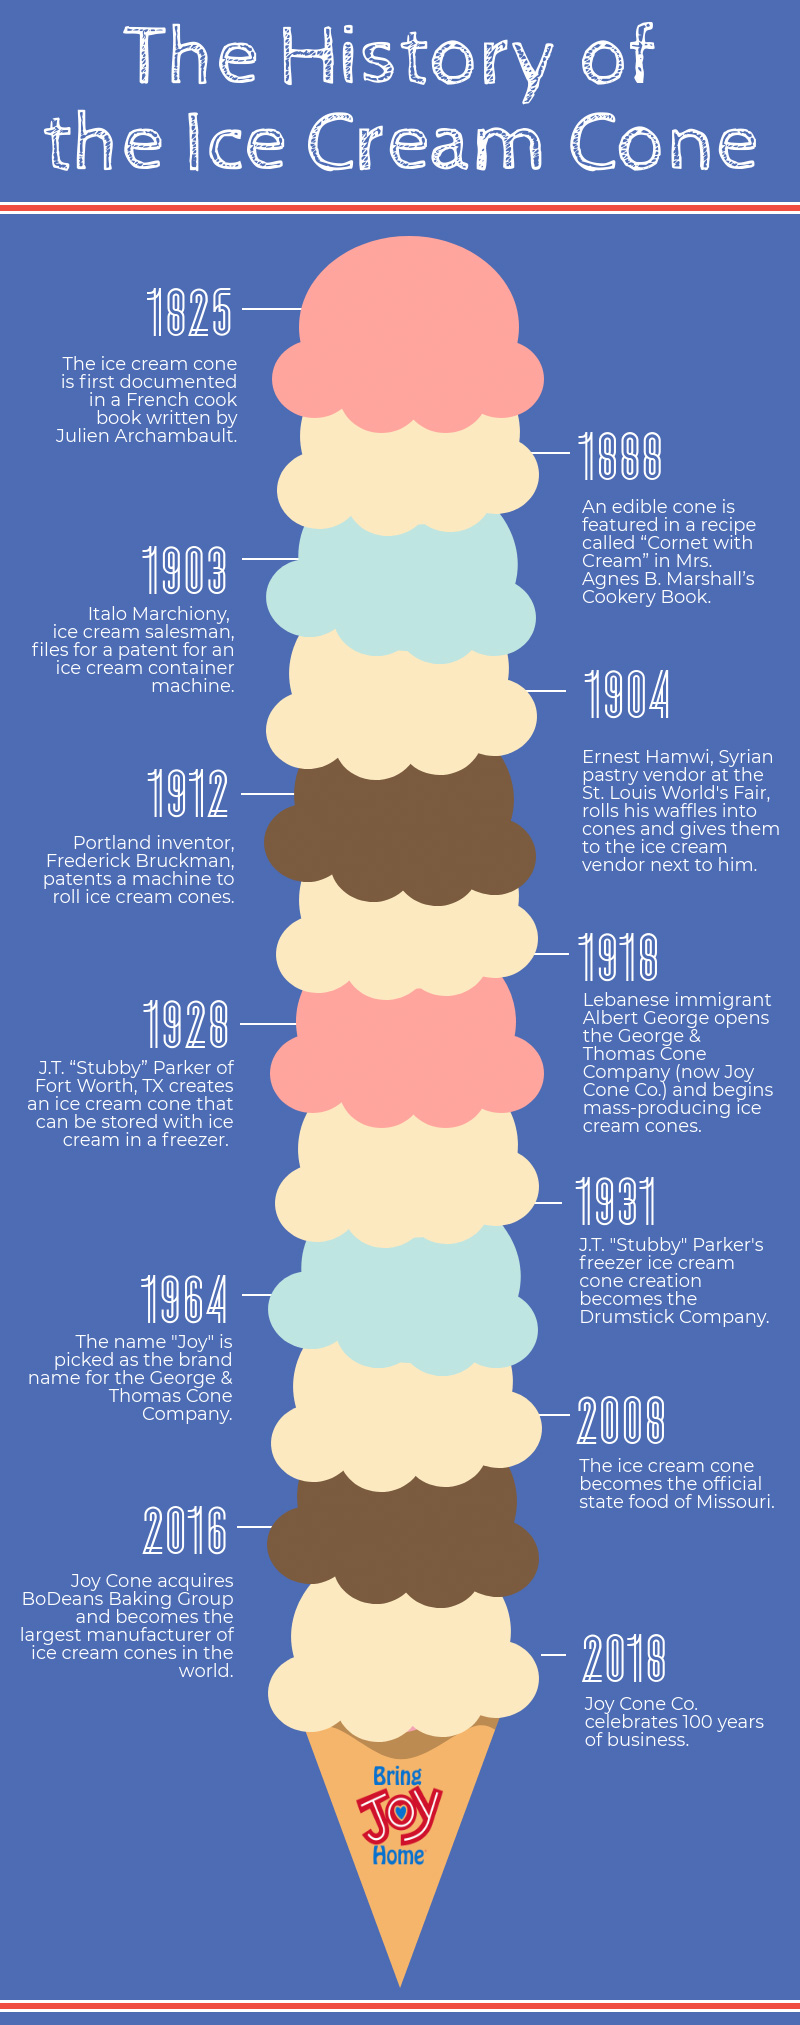 CR4 - Blog Entry: January 29, 1924 – The Ice Cream Cone Rolling Machine